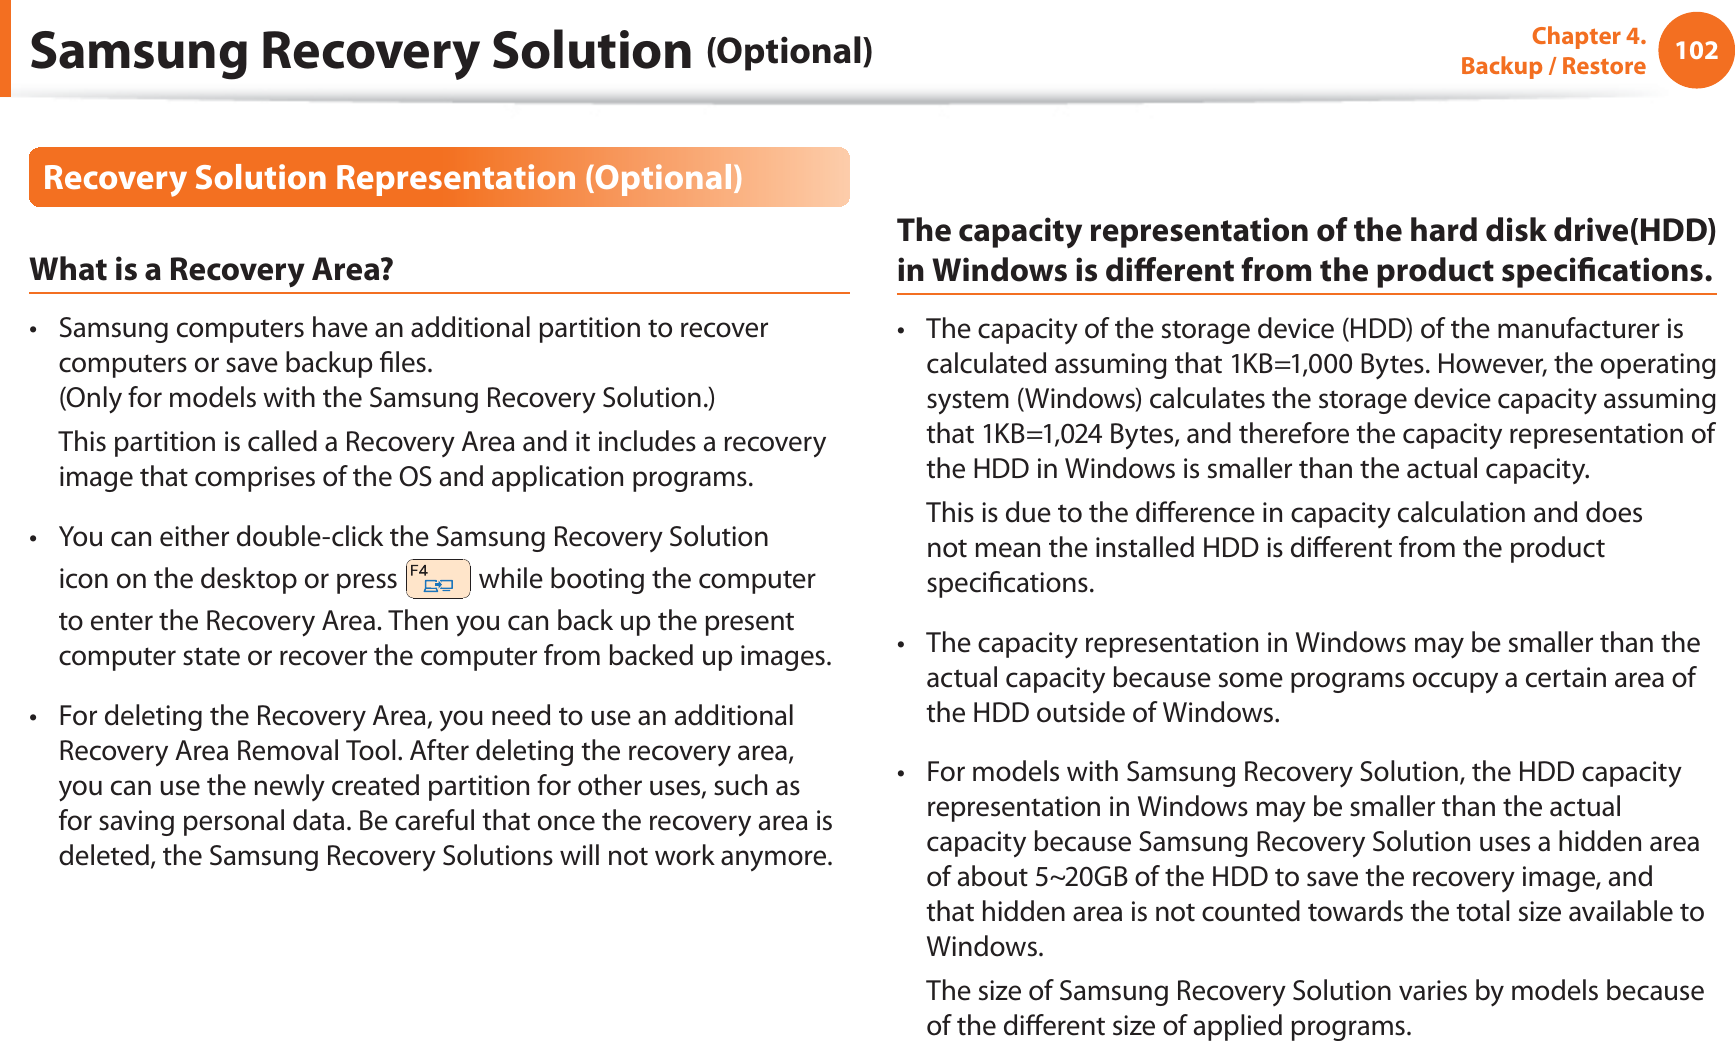 102Chapter  4.   Backup / RestoreRecovery Solution Representation (Optional)What is a Recovery Area?Samsung computers have an additional partition to recover t computers or save backup les. (Only for models with the Samsung Recovery Solution.)  This partition is called a Recovery Area and it includes a recovery image that comprises of the OS and application programs.You can either double-click the Samsung Recovery Solution t icon on the desktop or press   while booting the computer to enter the Recovery Area. Then you can back up the present computer state or recover the computer from backed up images.For deleting the Recovery Area, you need to use an additional t Recovery Area Removal Tool. After deleting the recovery area, you can use the newly created partition for other uses, such as for saving personal data. Be careful that once the recovery area is deleted, the Samsung Recovery Solutions will not work anymore.The capacity representation of the hard disk drive(HDD) in Windows is dierent from the product specications.The capacity of the storage device (HDD) of the manufacturer is t calculated assuming that 1KB=1,000 Bytes. However, the operating system (Windows) calculates the storage device capacity assuming that 1KB=1,024 Bytes, and therefore the capacity representation of the HDD in Windows is smaller than the actual capacity.  This is due to the dierence in capacity calculation and does not mean the installed HDD is dierent from the product specications.The capacity representation in Windows may be smaller than the t actual capacity because some programs occupy a certain area of the HDD outside of Windows.For models with Samsung Recovery Solution, the HDD capacity t representation in Windows may be smaller than the actual capacity because Samsung Recovery Solution uses a hidden area of about 5~20GB of the HDD to save the recovery image, and that hidden area is not counted towards the total size available to Windows.  The size of Samsung Recovery Solution varies by models because of the dierent size of applied programs.Samsung Recovery Solution (Optional)